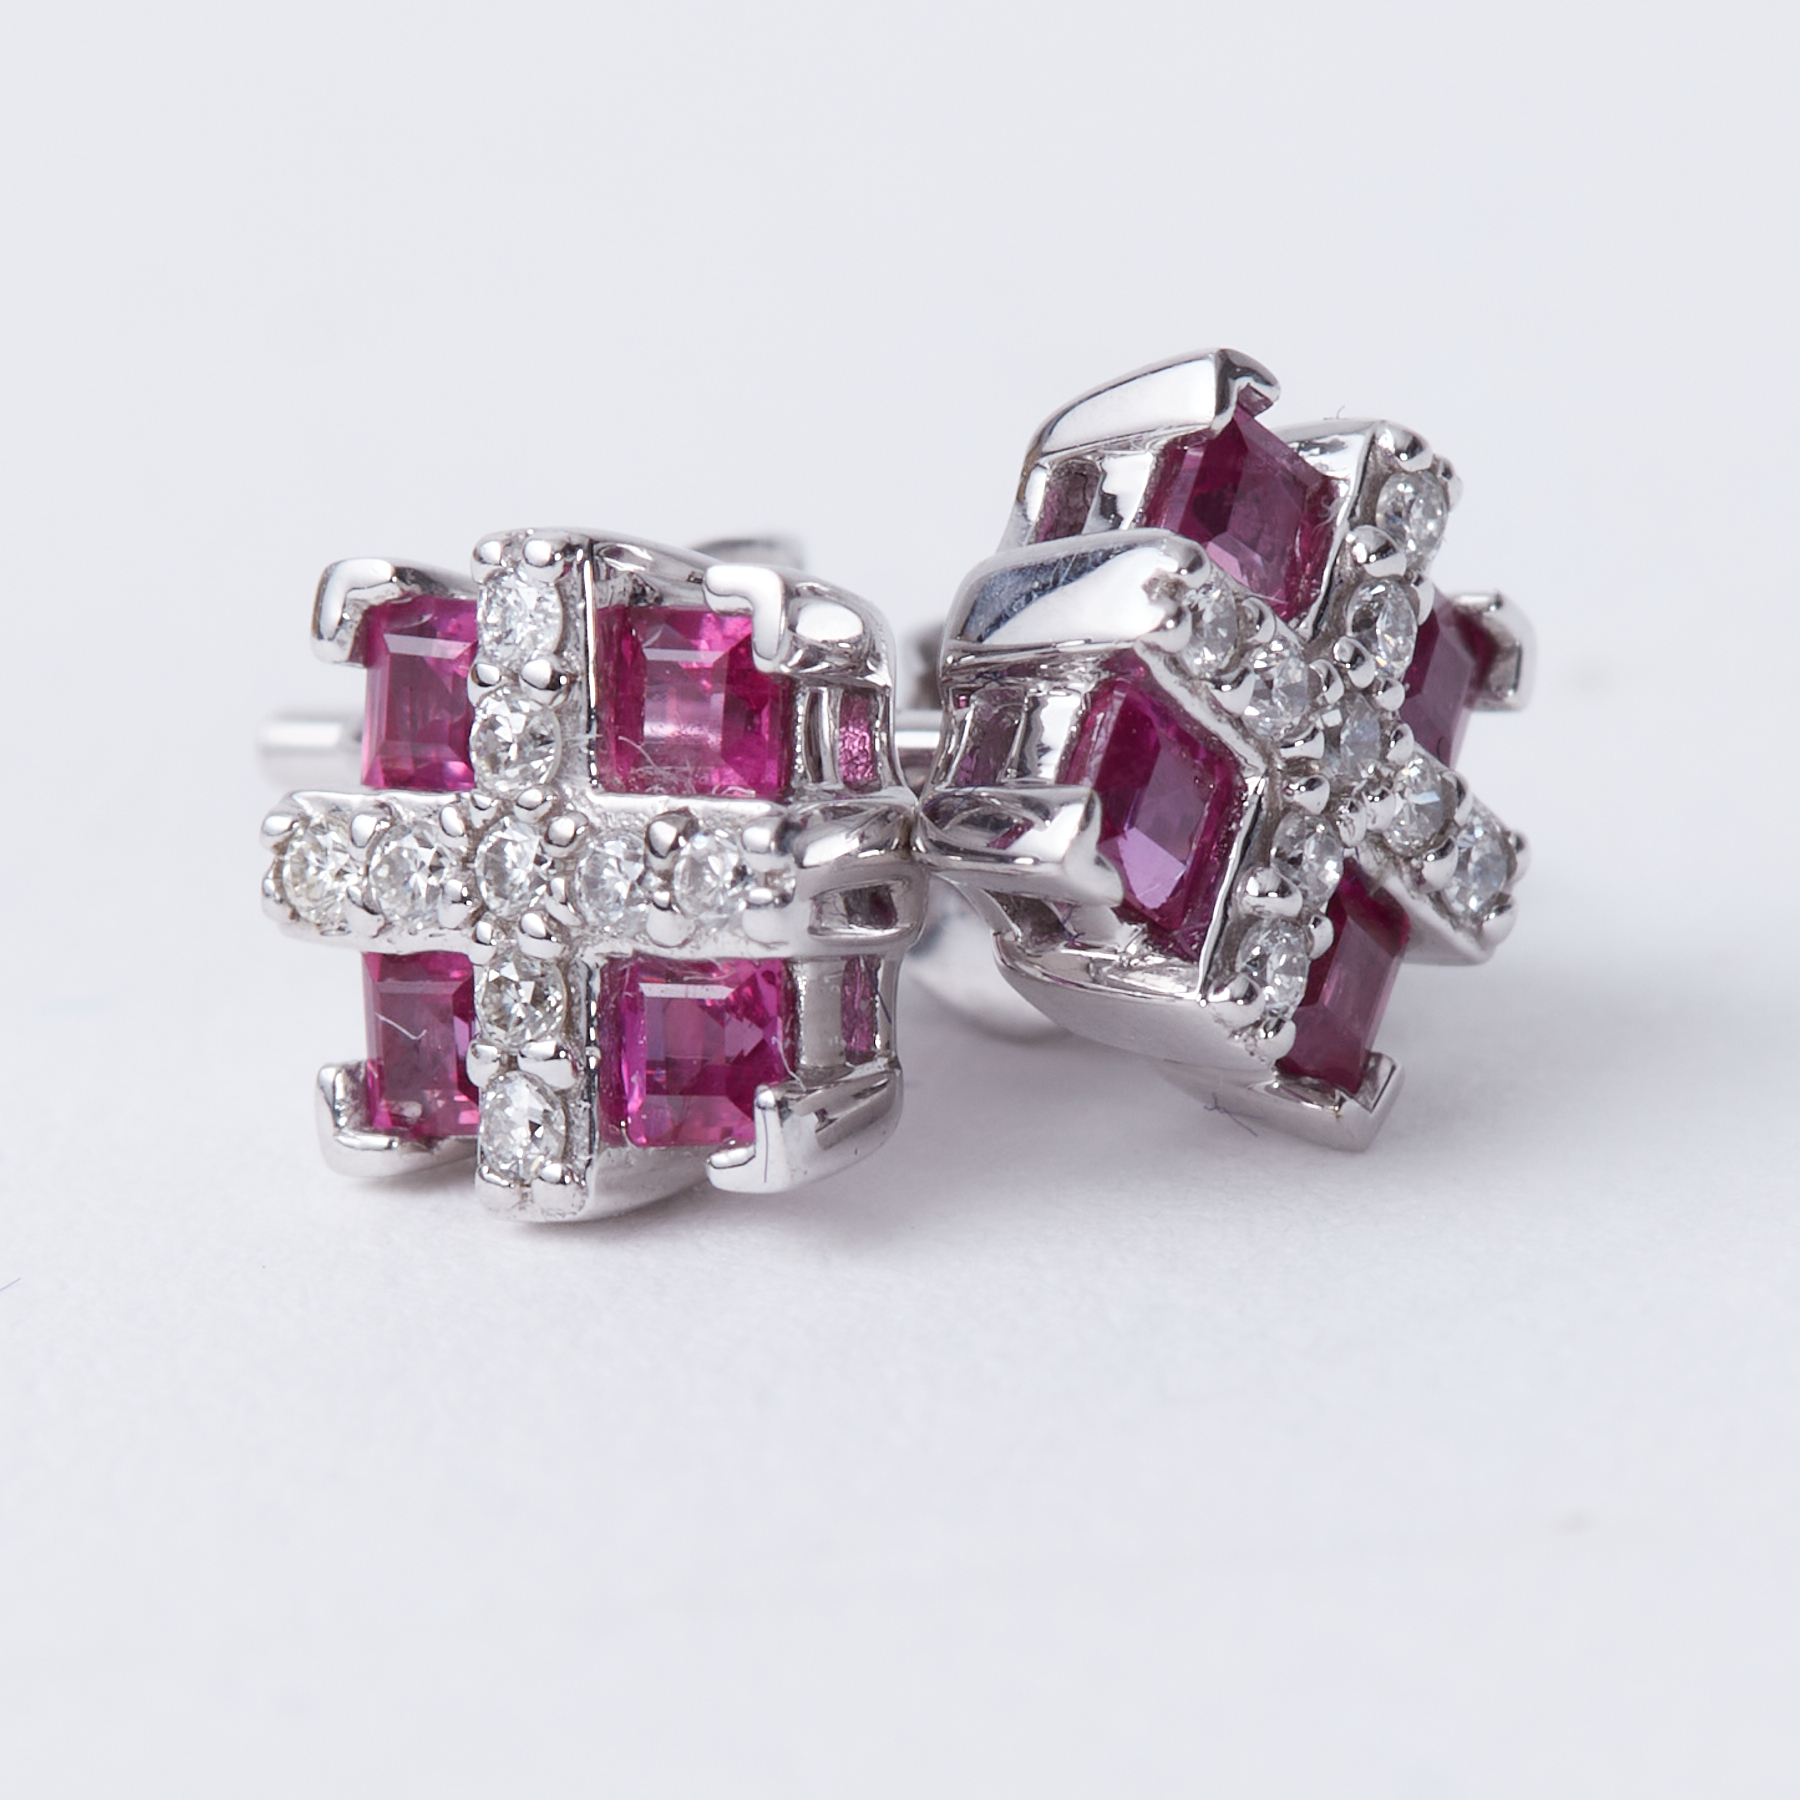 A pair of 18ct white gold square shaped studs set with square shaped rubies & small round